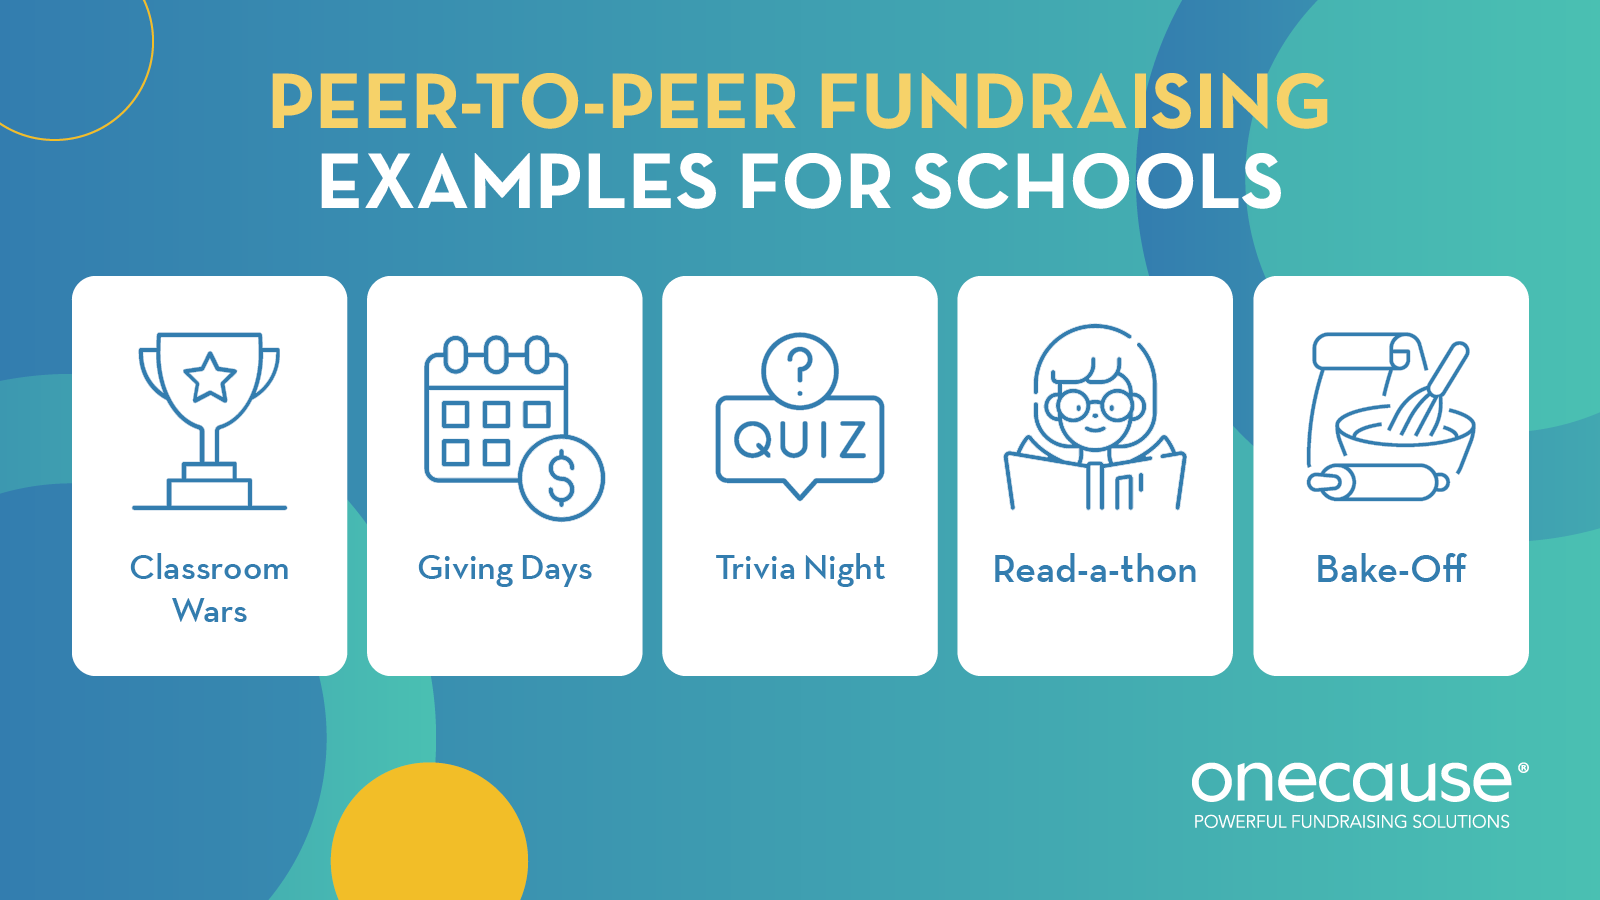 This image lists peer-to-peer fundraising ideas for schools, also covered in the text below.